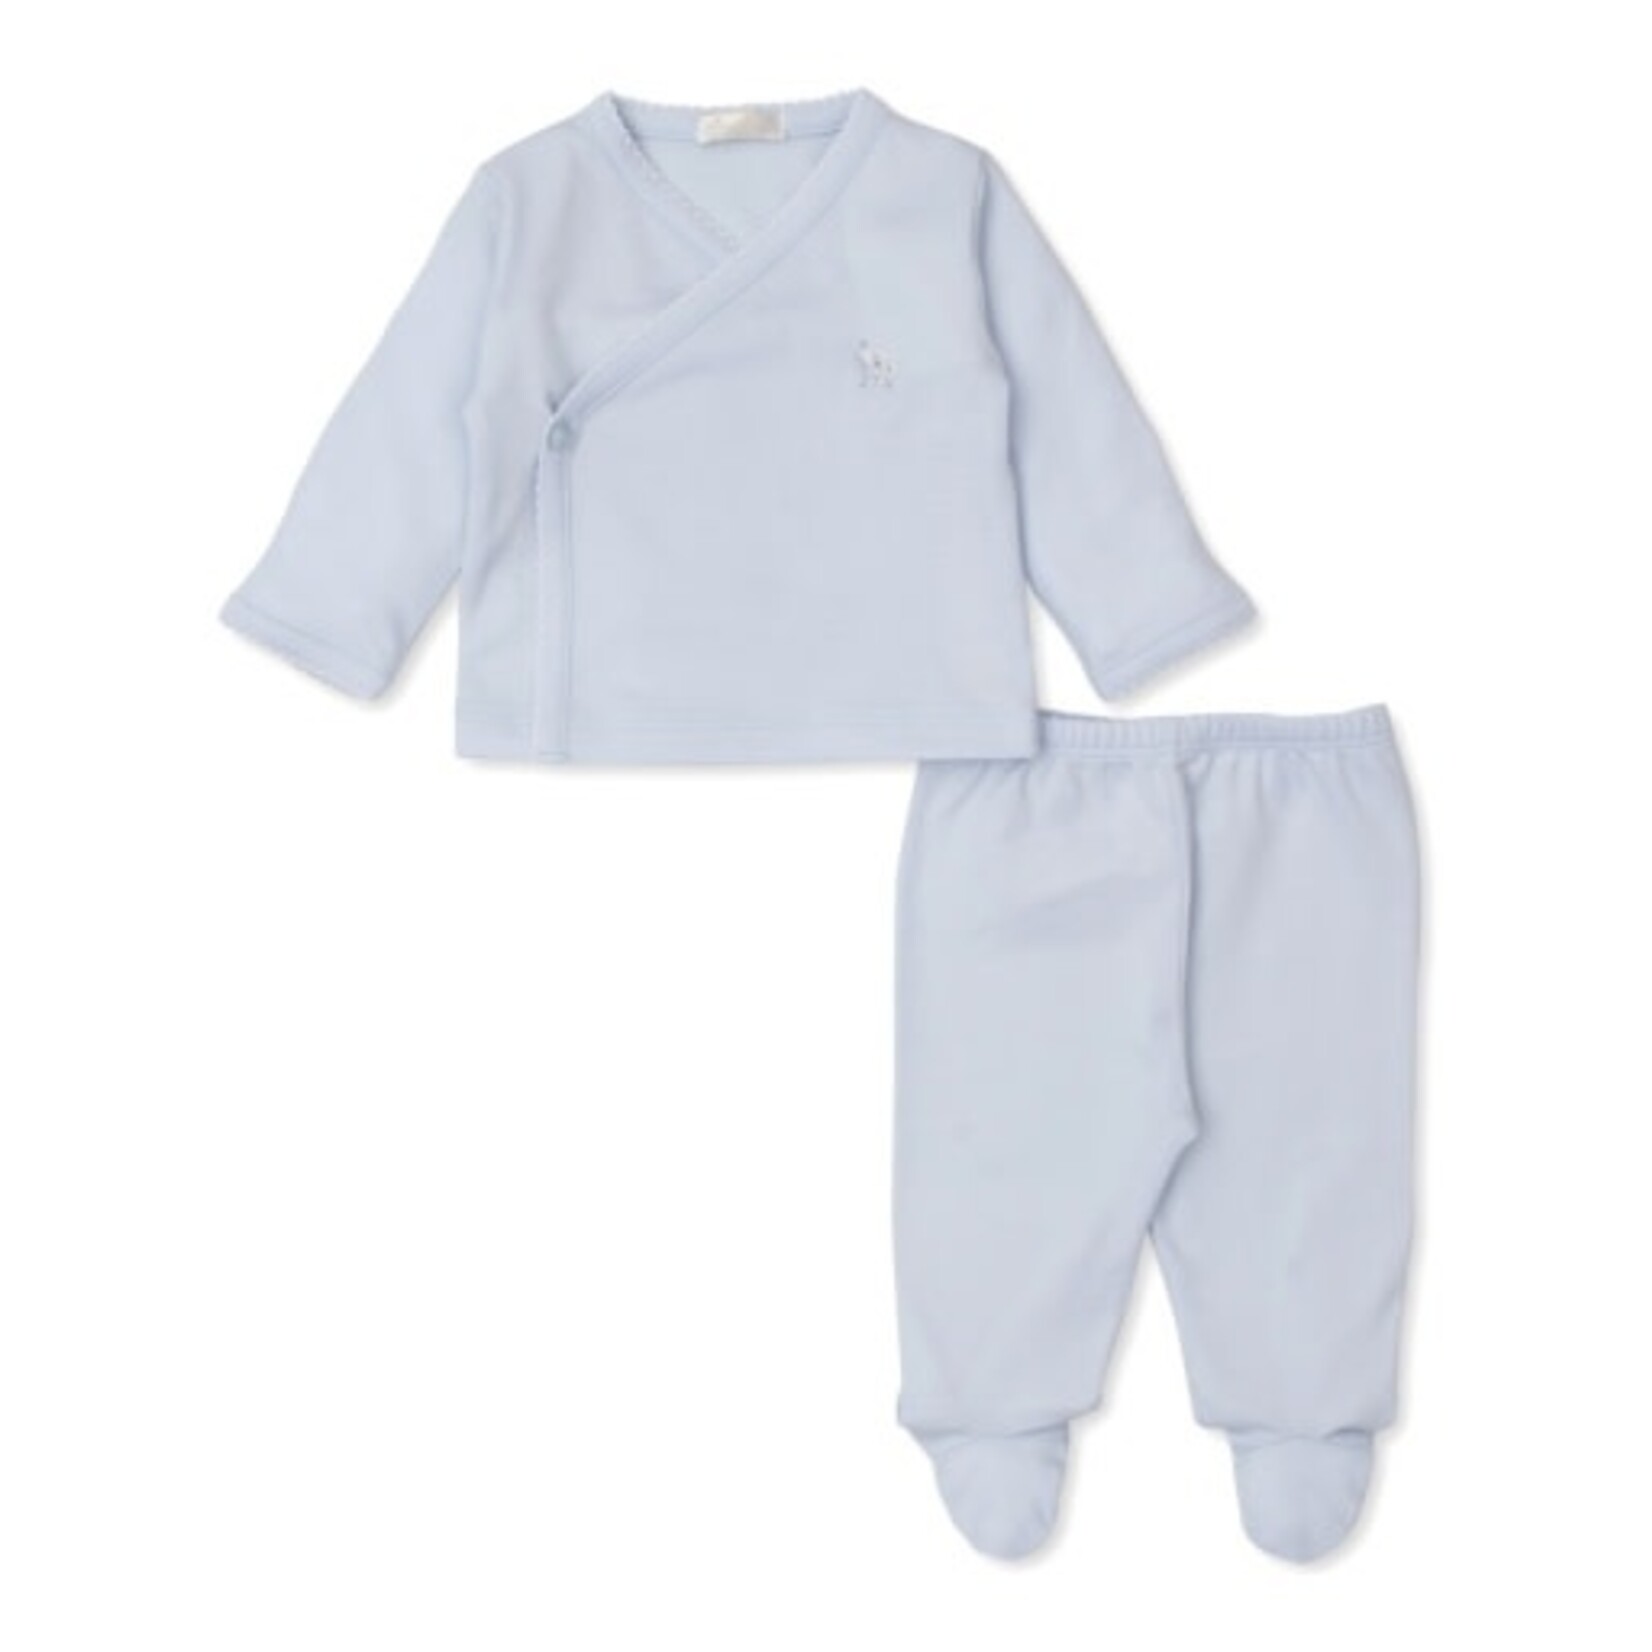 KISSY KISSY Embroidered Fleecy Sheep Footed Pant Set